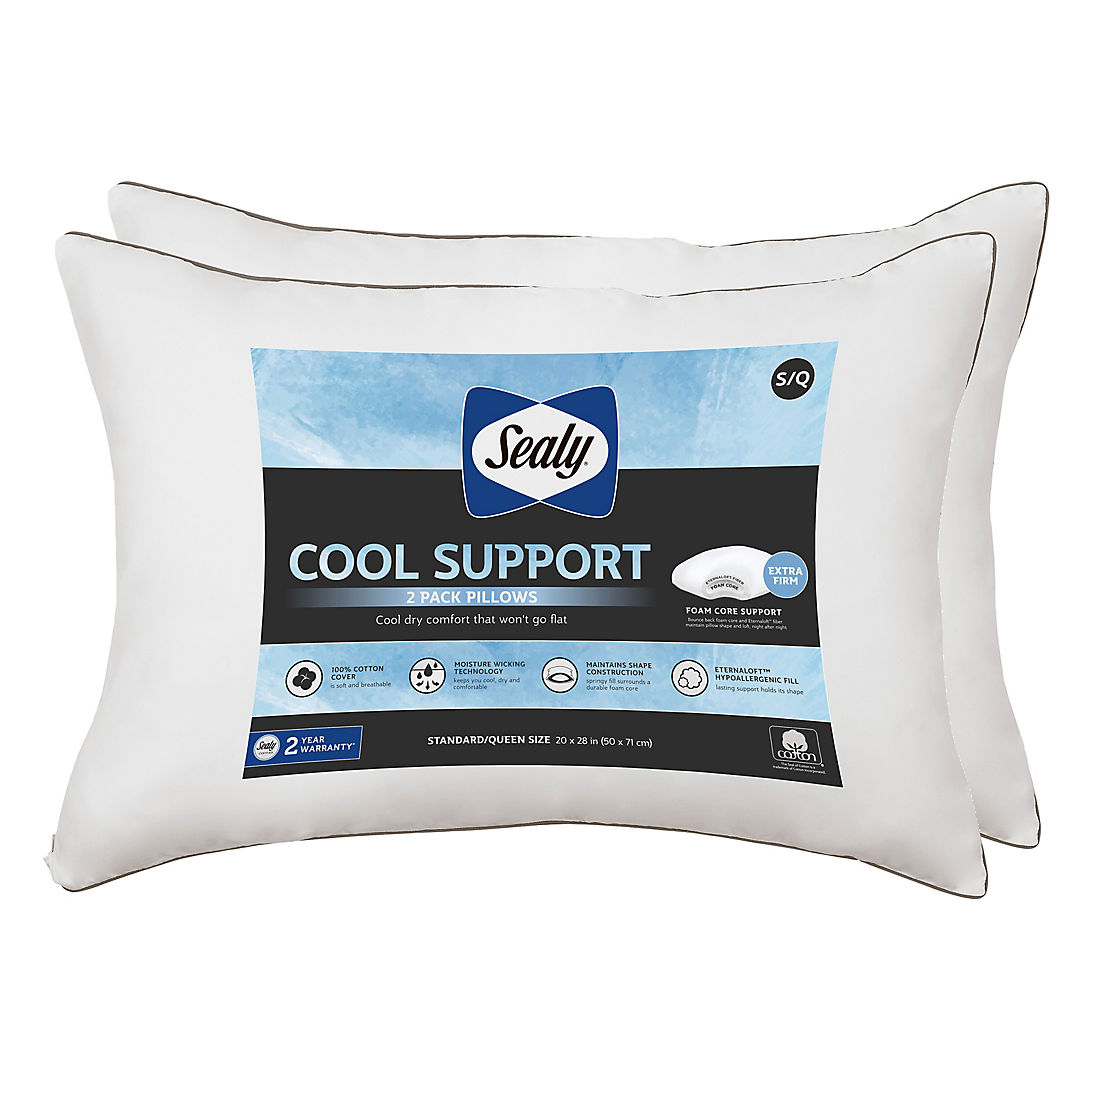 Sealy Cool Support Standard/Queen Extra Firm Pillow, 2 pk.